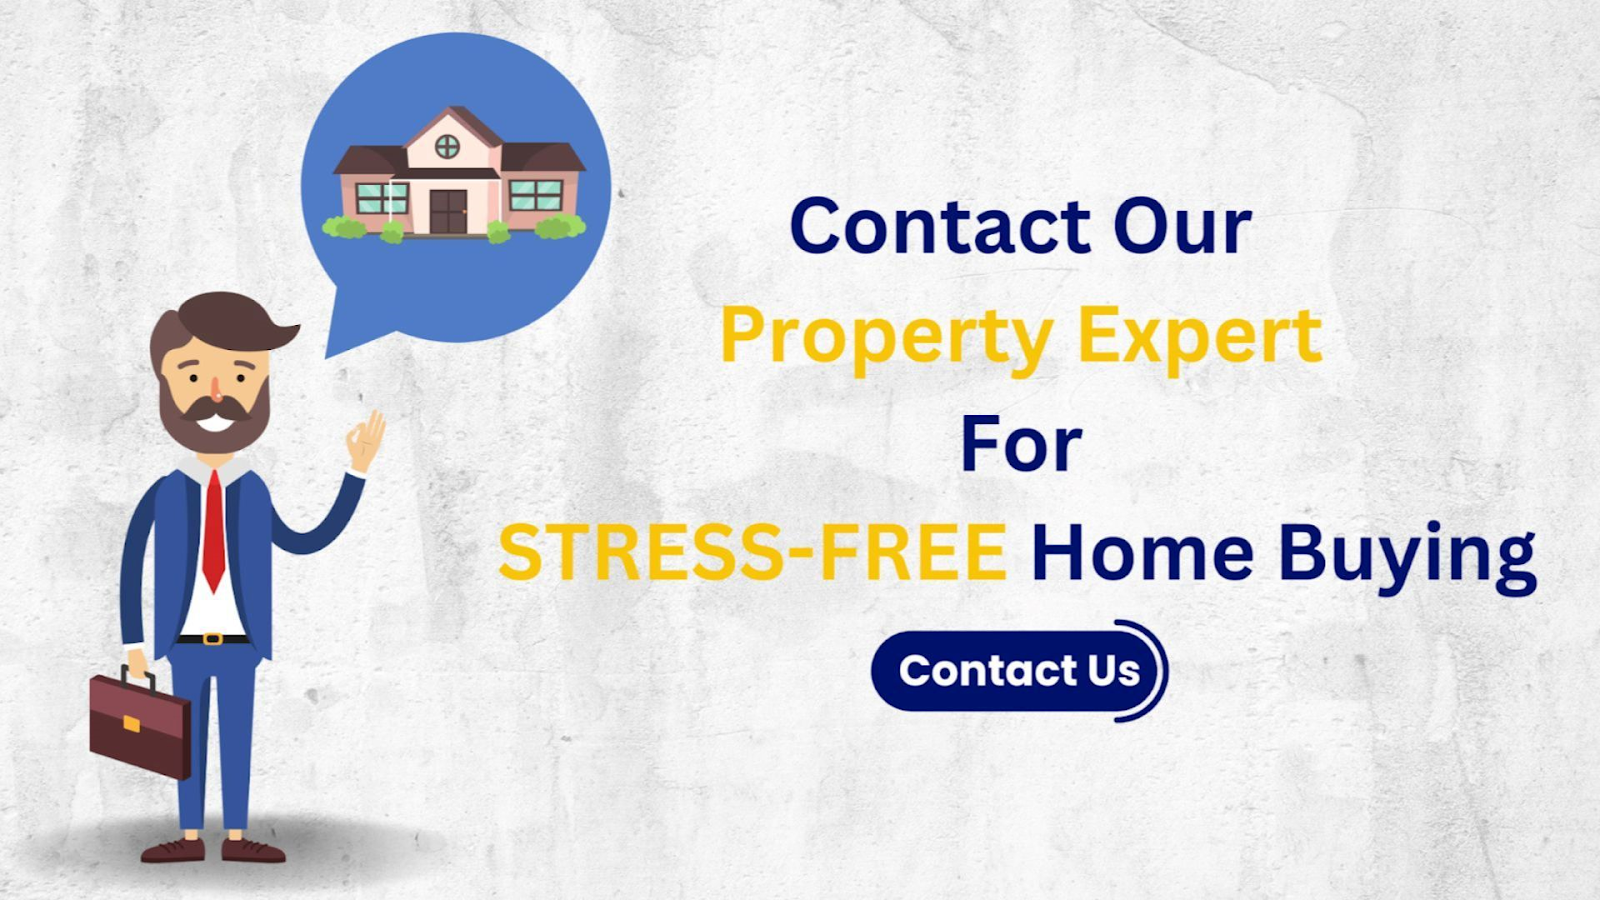 Contact a real estate expert at PropertyCloud for hassle-free home buying with expert advice.